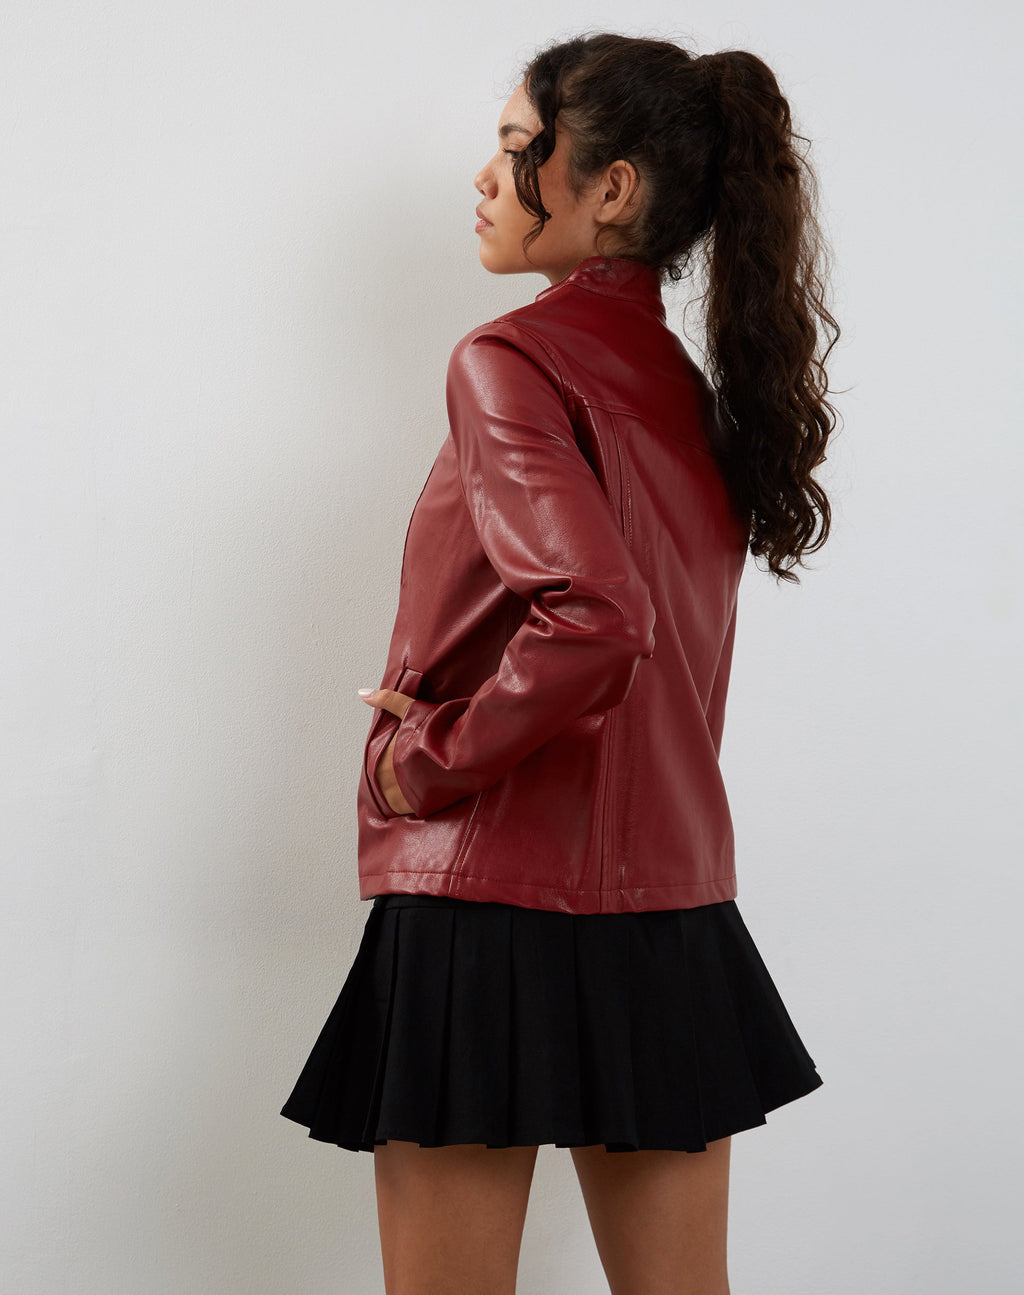 Red Liquid Leather Jacket – Indie Collection